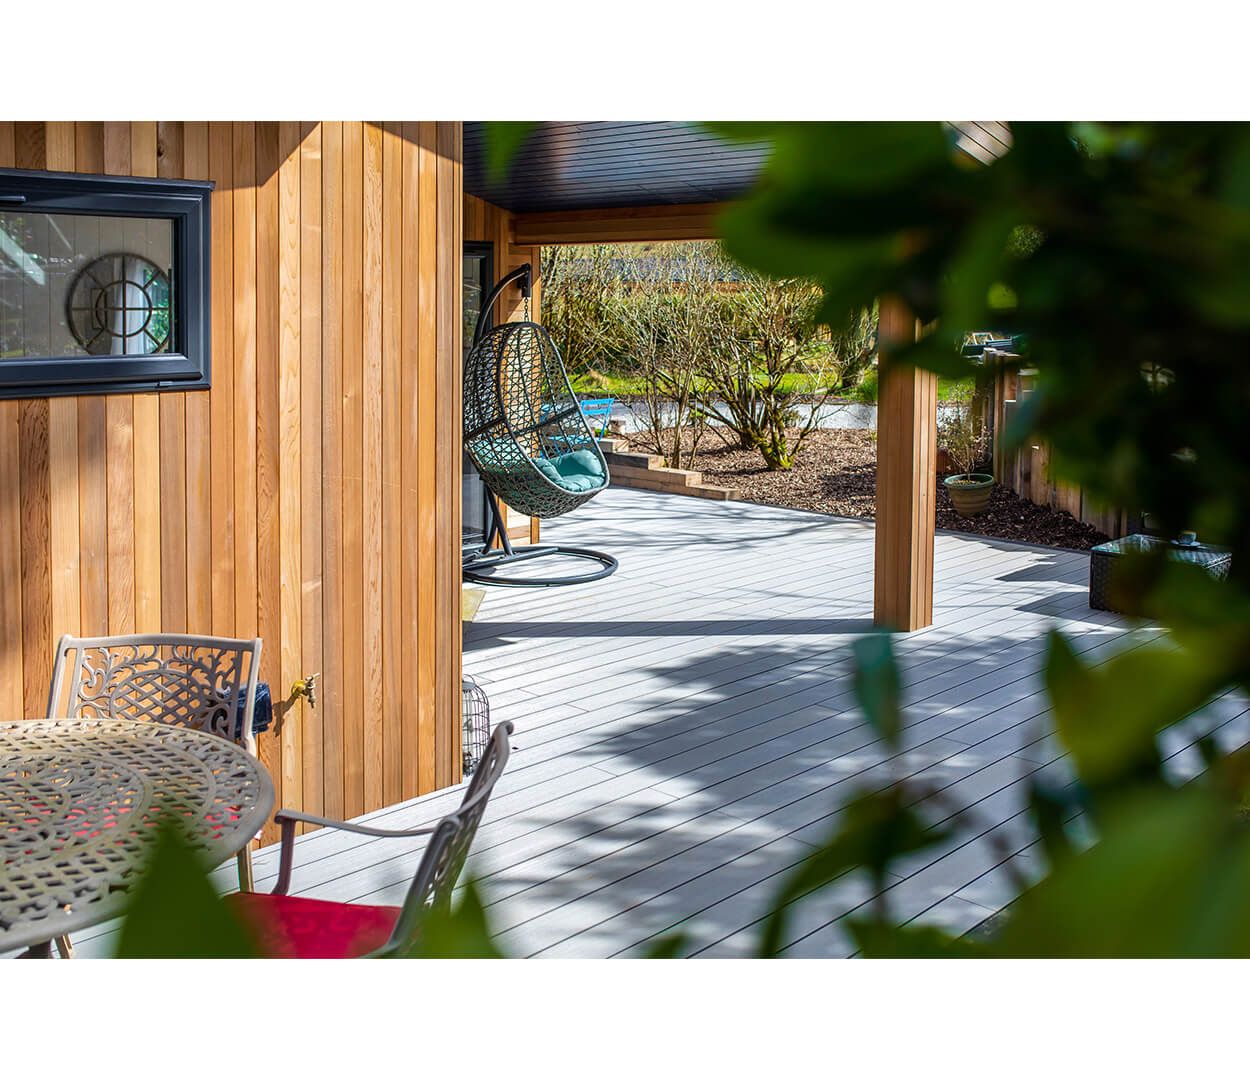 Luxury holiday retreats by Palstone Lodges use Cladco Woodgrain Effect and Original Composite Decking Boards